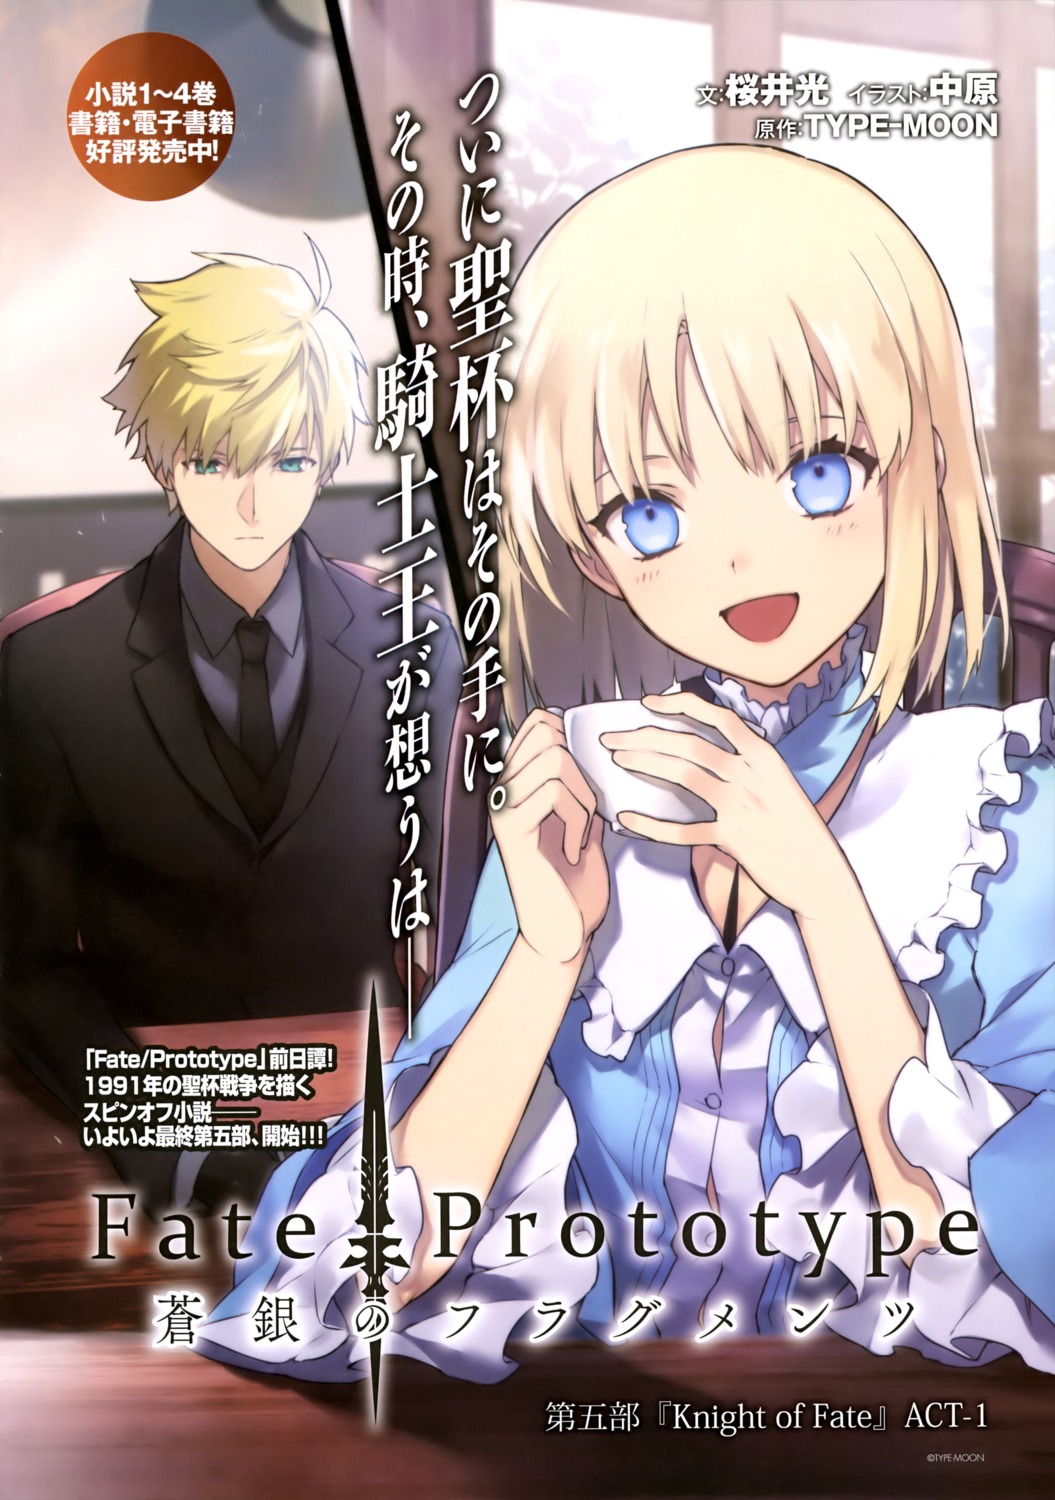 Type Moon Nakahara Fate Prototype Fate Prototype Fragments Of Blue And Silver Fate Stay Night Saber Fate Prototype Sajou Manaka Business Suit Dress Yande Re